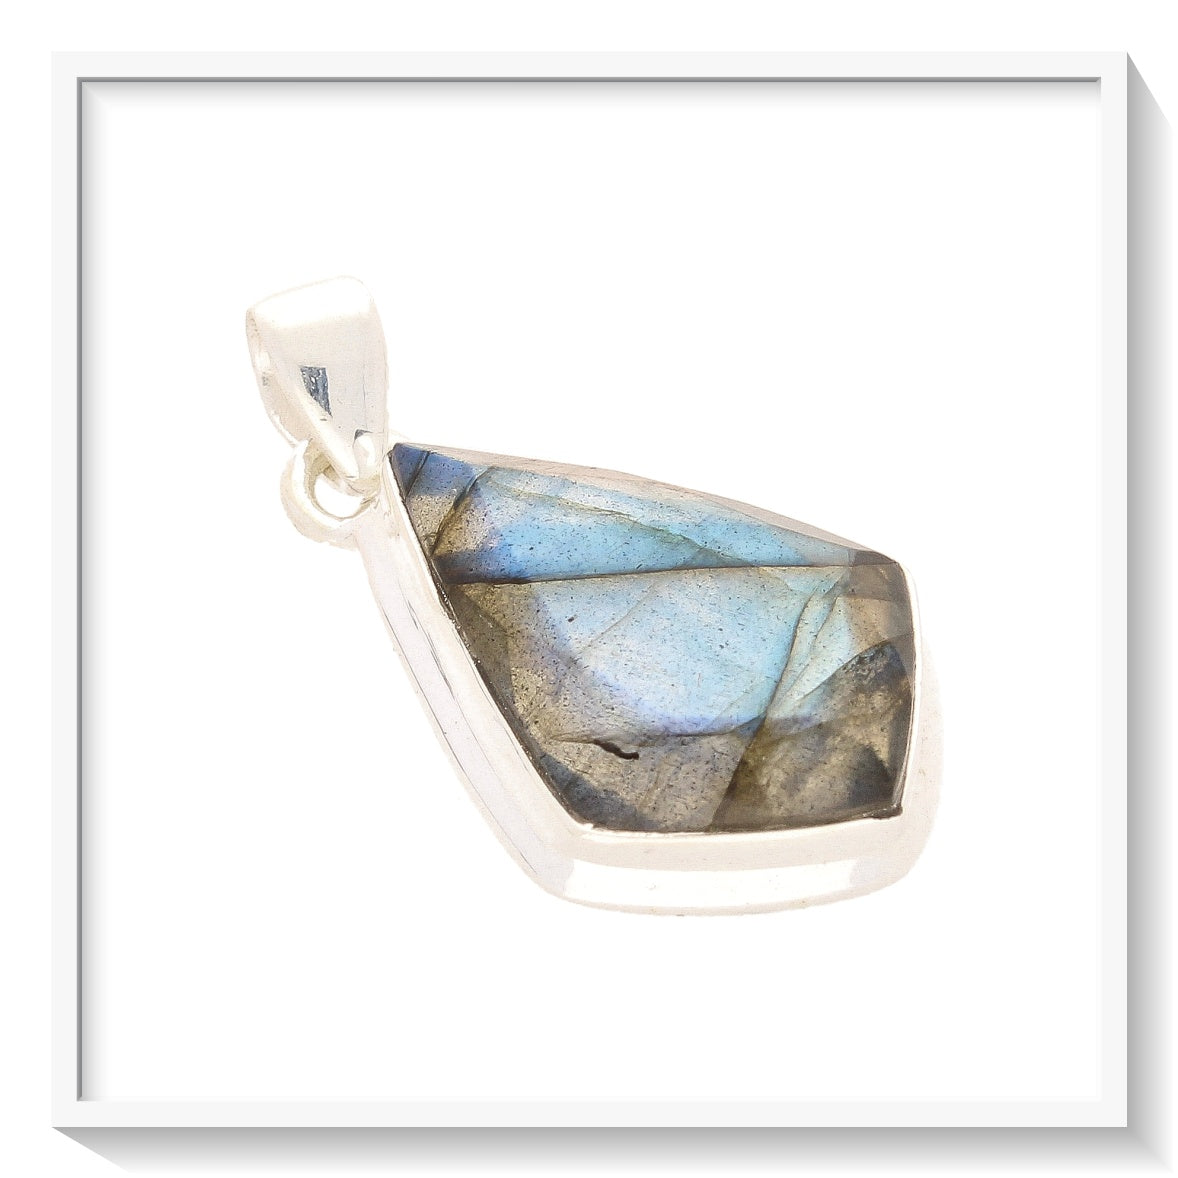 Buy your Faceted Labradorite Sterling Silver Necklace online now or in store at Forever Gems in Franschhoek, South Africa